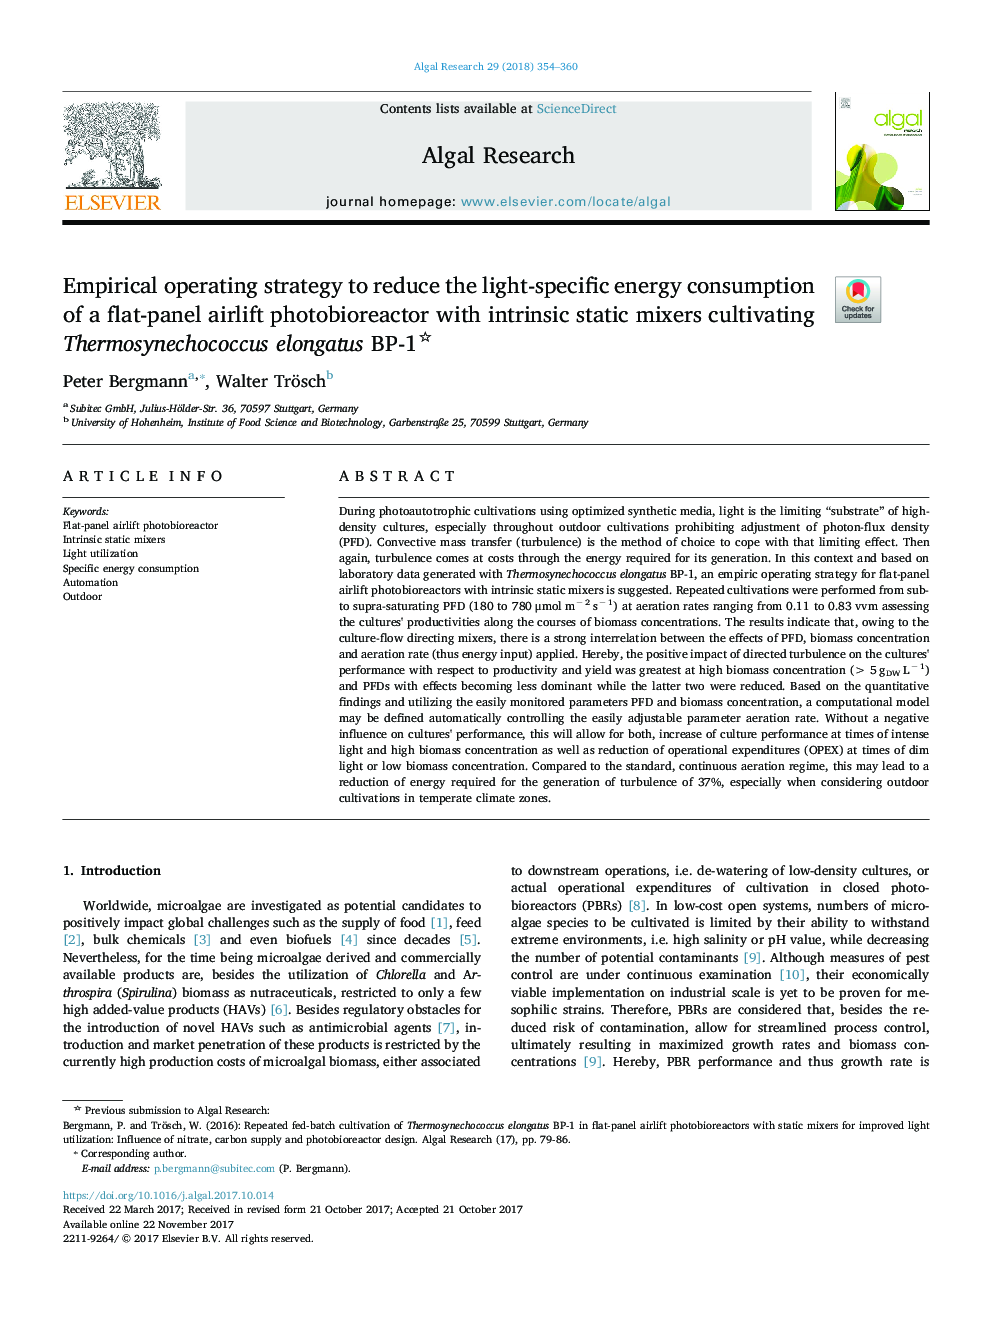 Empirical operating strategy to reduce the light-specific energy consumption of a flat-panel airlift photobioreactor with intrinsic static mixers cultivating Thermosynechococcus elongatus BP-1